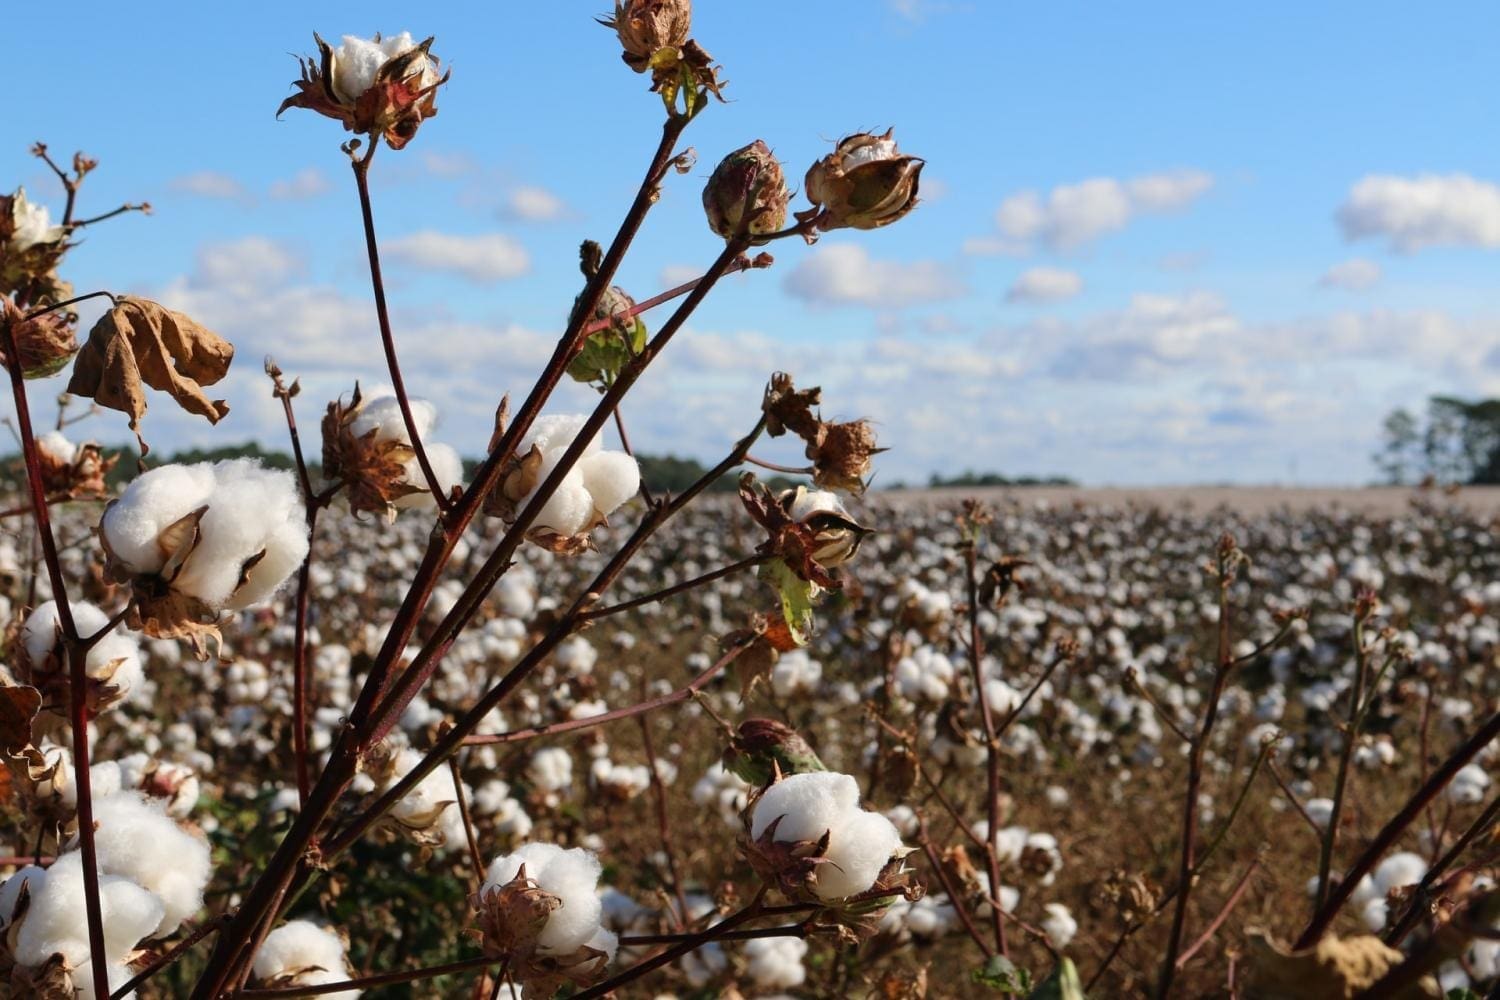 BTMA Depends more on Quality African Cotton